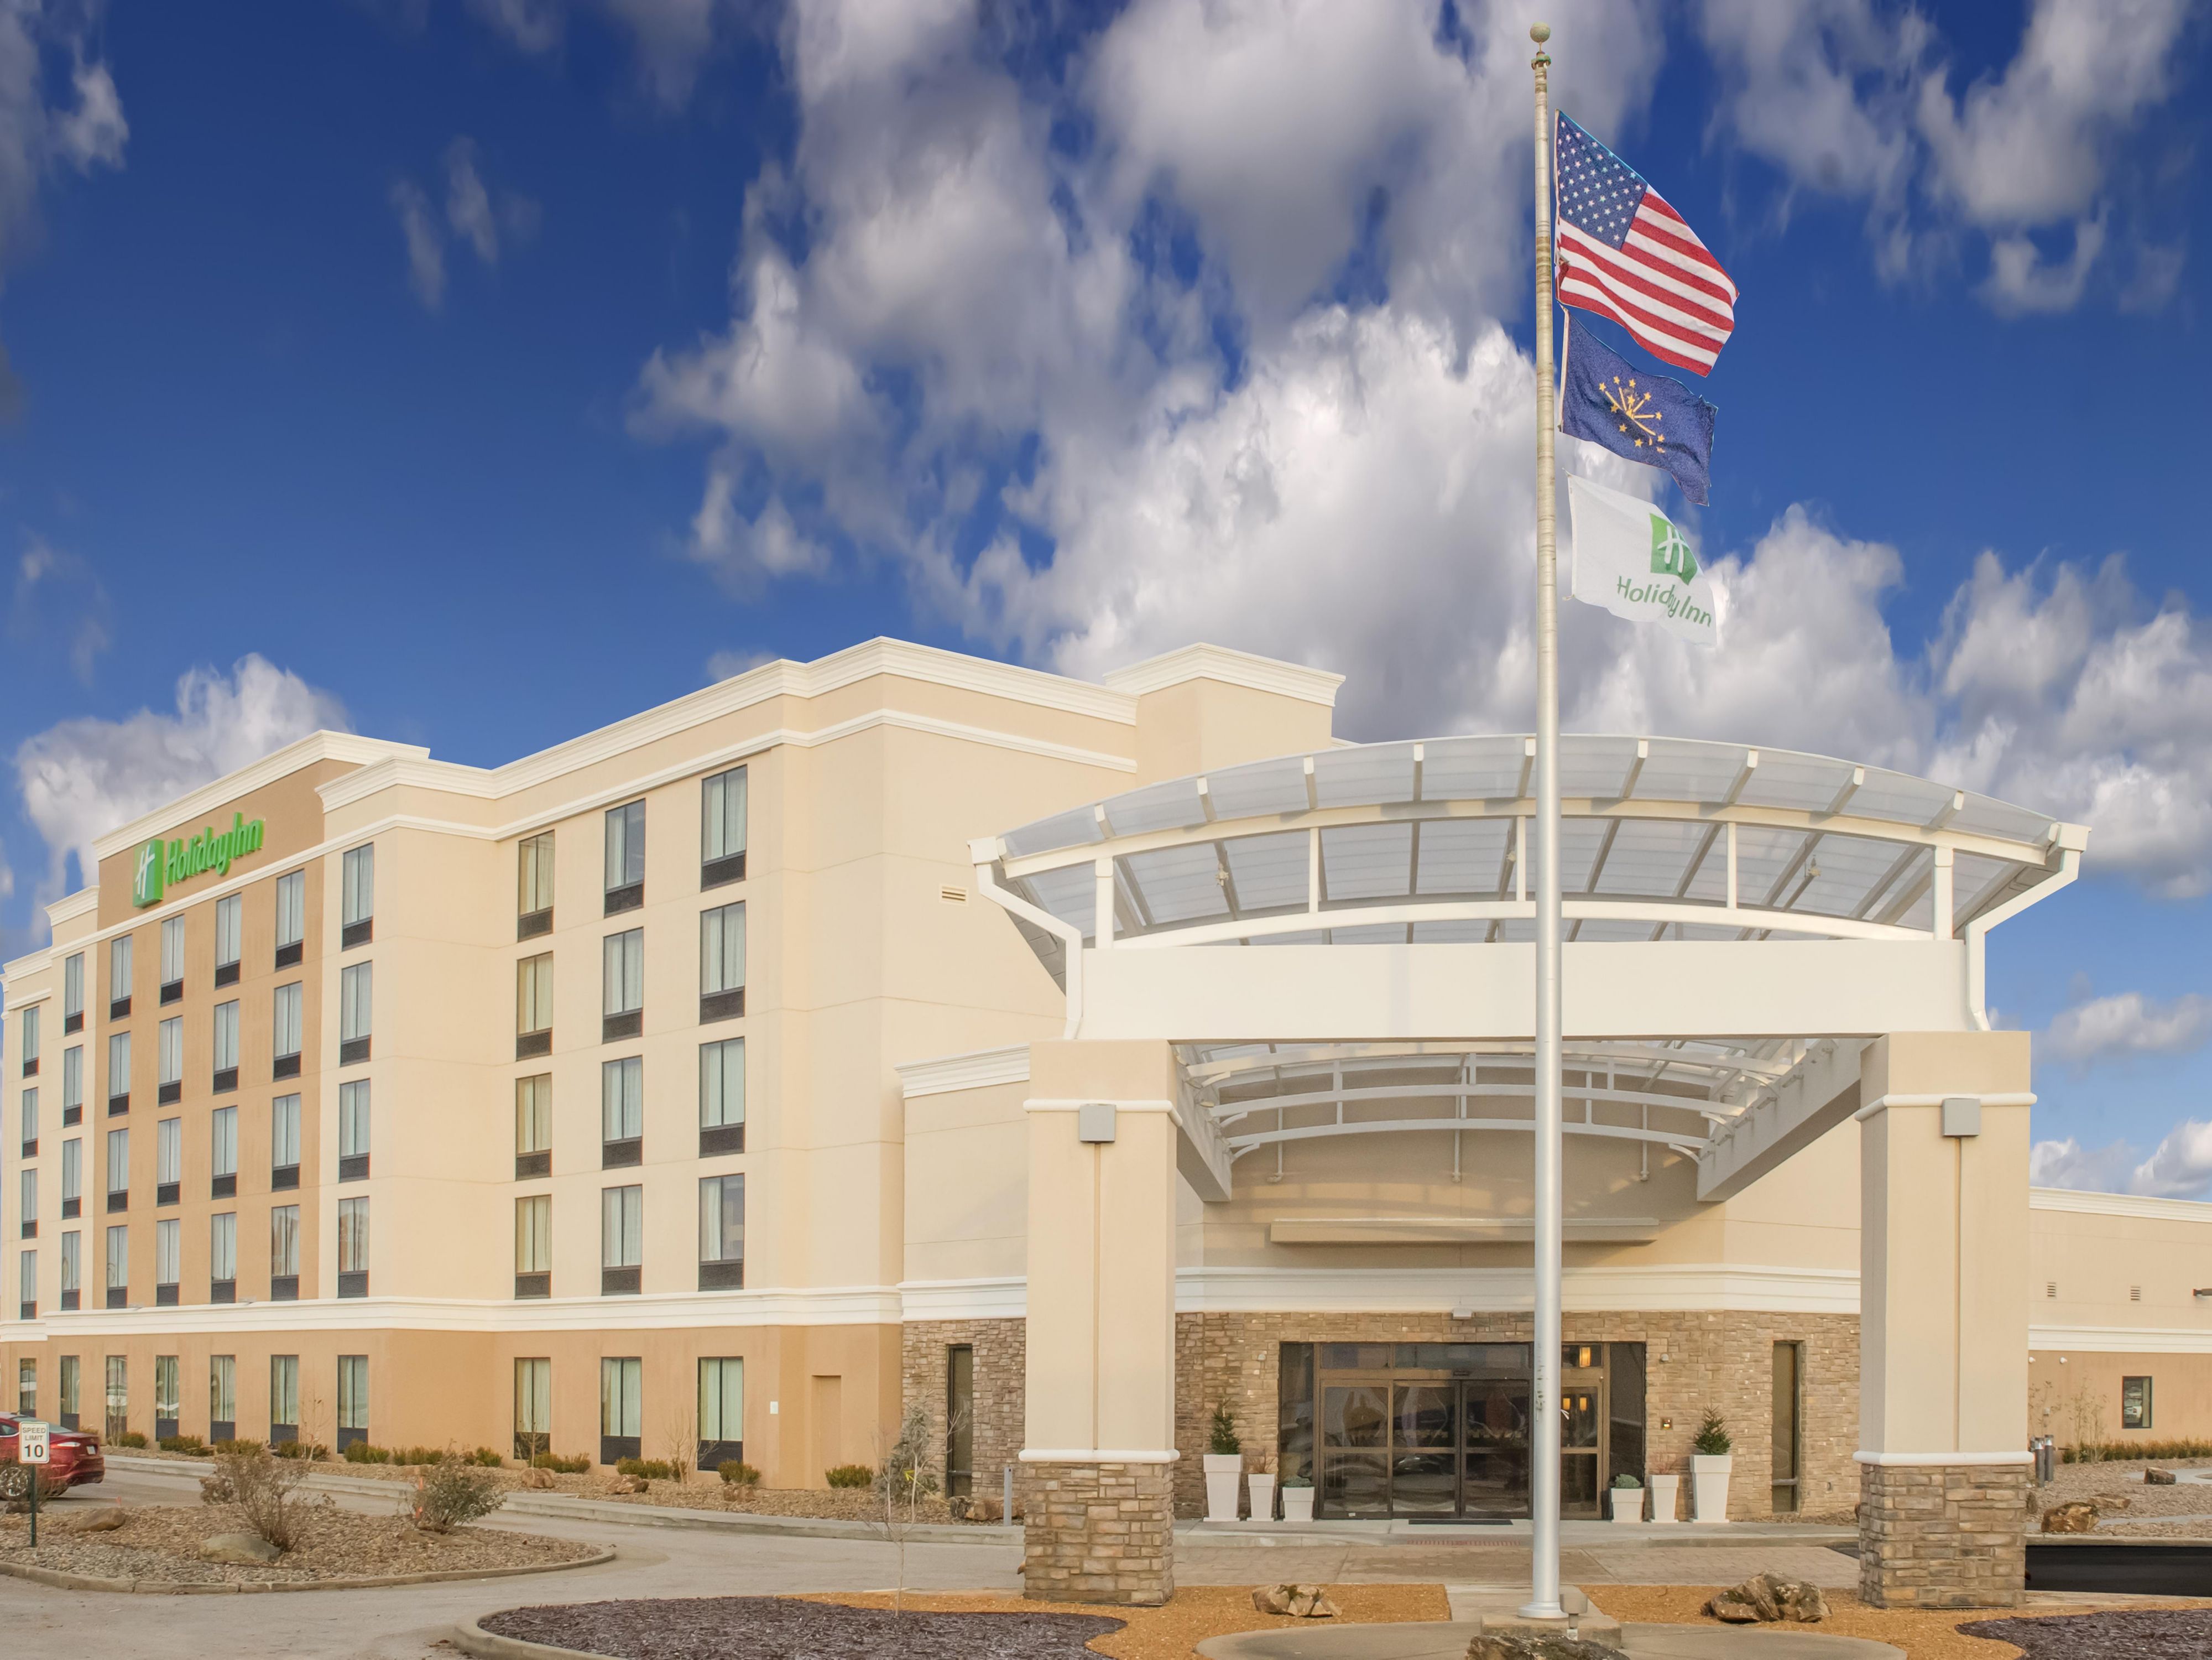 Our hotel is conveniently located at the intersection of I70 and US Highway 41 making it easy to get wherever you need to go. Located around us are several fine restaurants and shopping attractions.